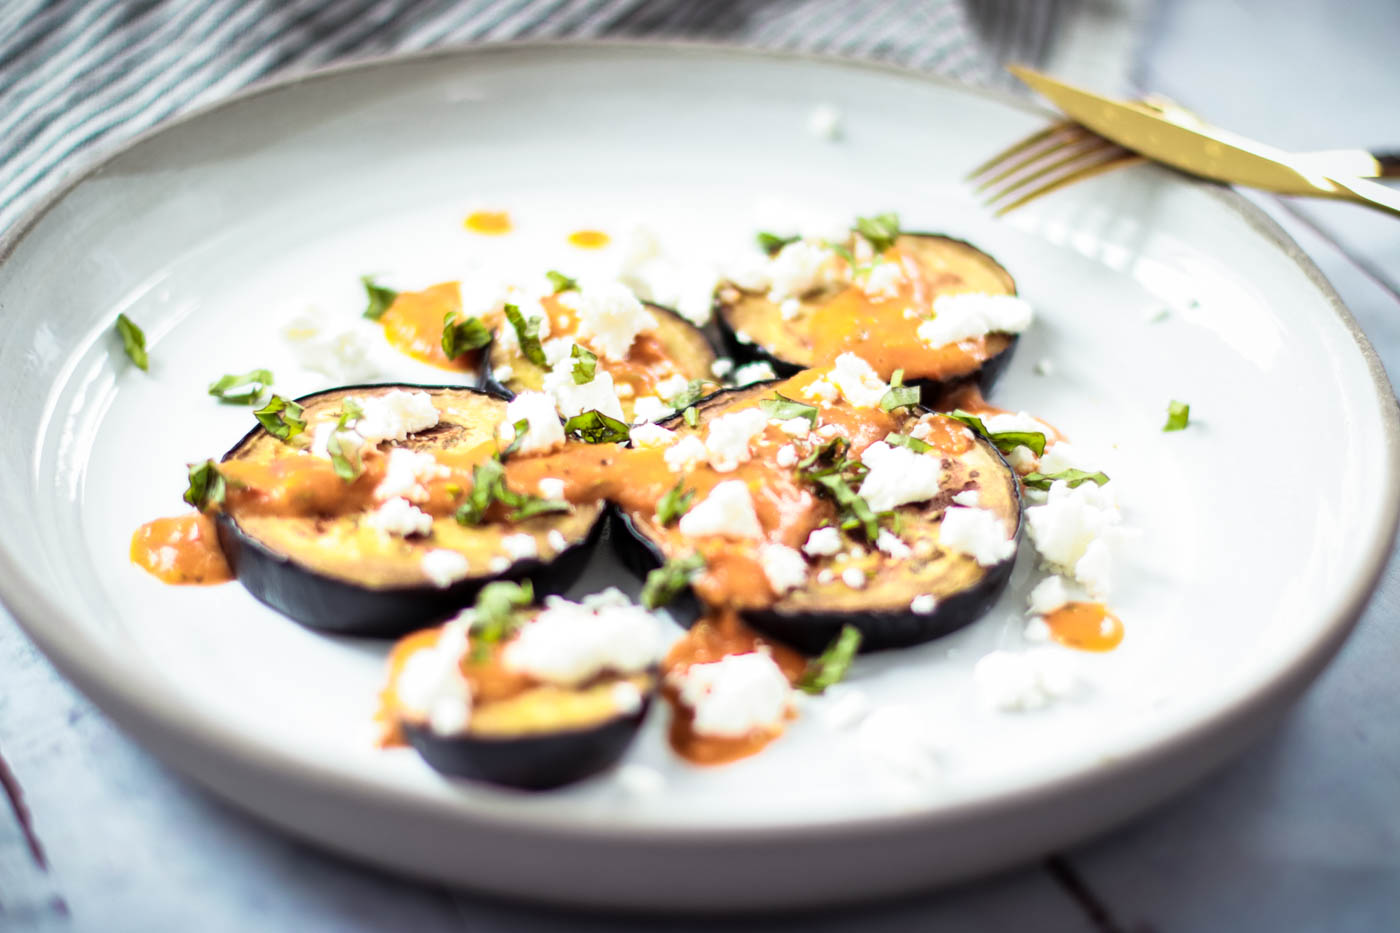 Easy Summer Lunch: Grilled Eggplant with Tomato Sauce, Basil and Feta Cheese